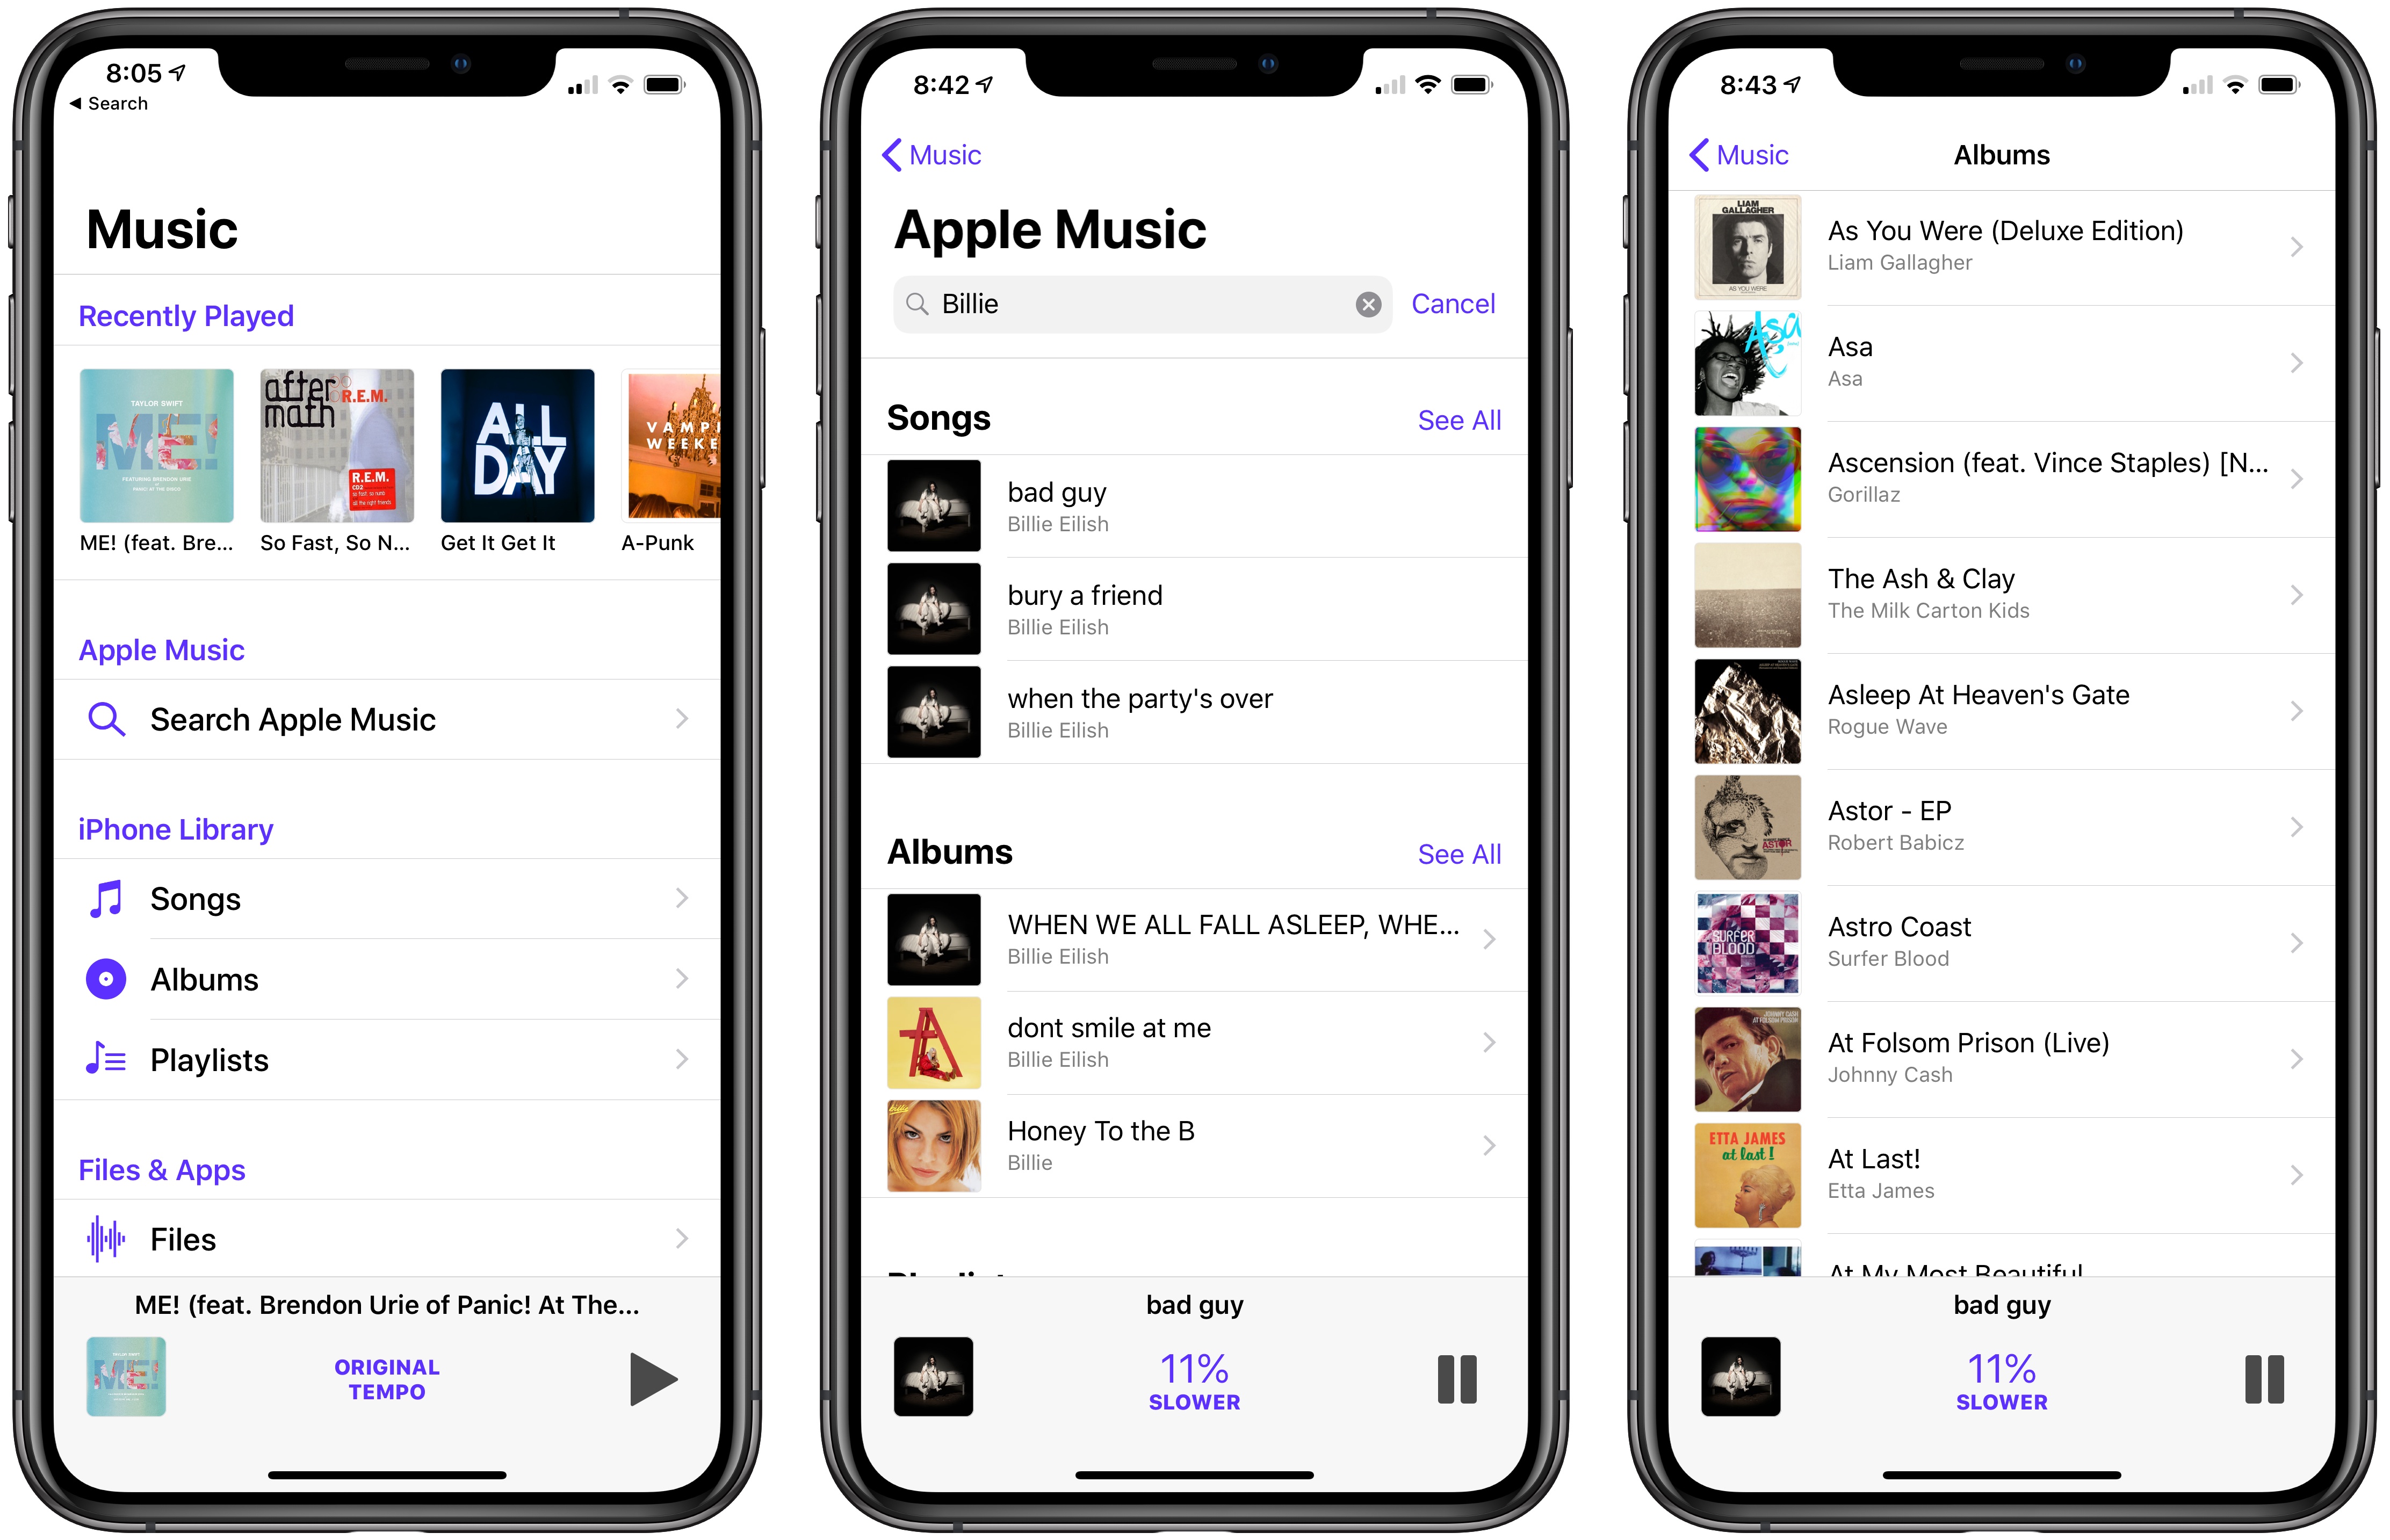 The music picker, searching Apple Music, and browsing albums in my iTunes Music Library.